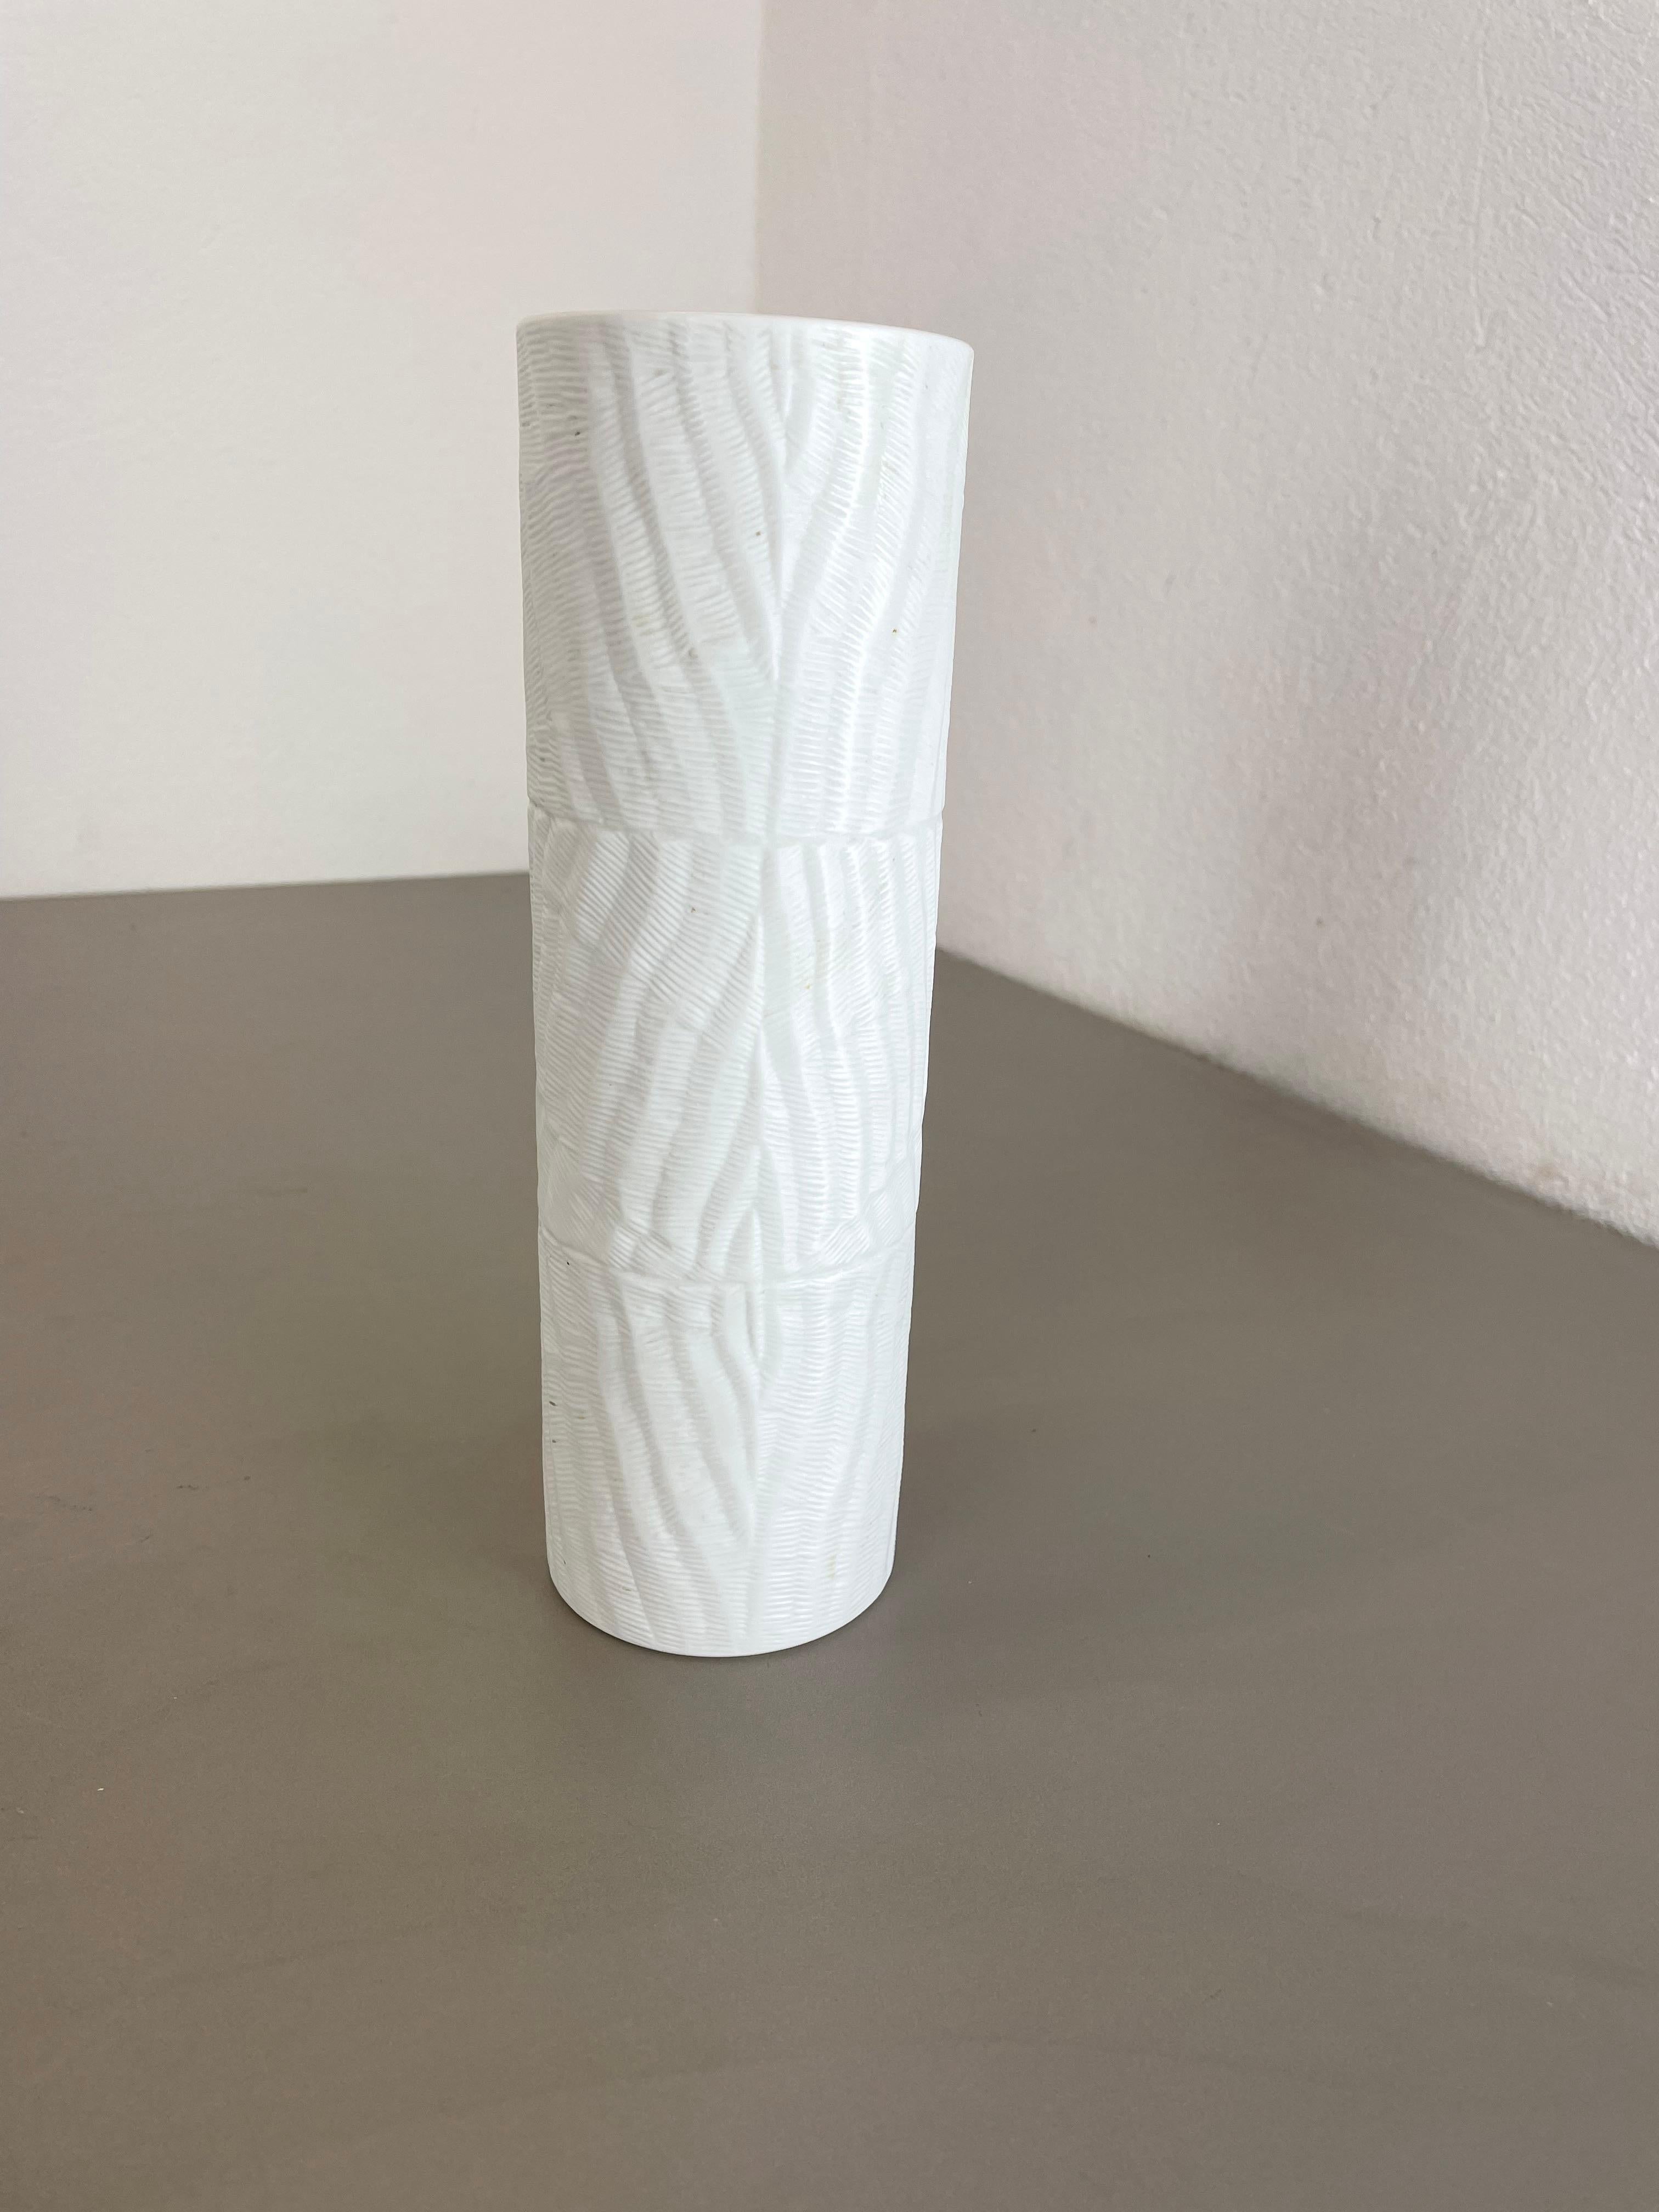 Article:

OP Art Porcelain vase


Producer:

Rosenthal, Germany


Designer:

Martin Freyer




Decade:

1970s




This original vintage OP Art vase was produced in the 1970s in Germany. It is made of porcelain with an OP ART surface.
The bottom is